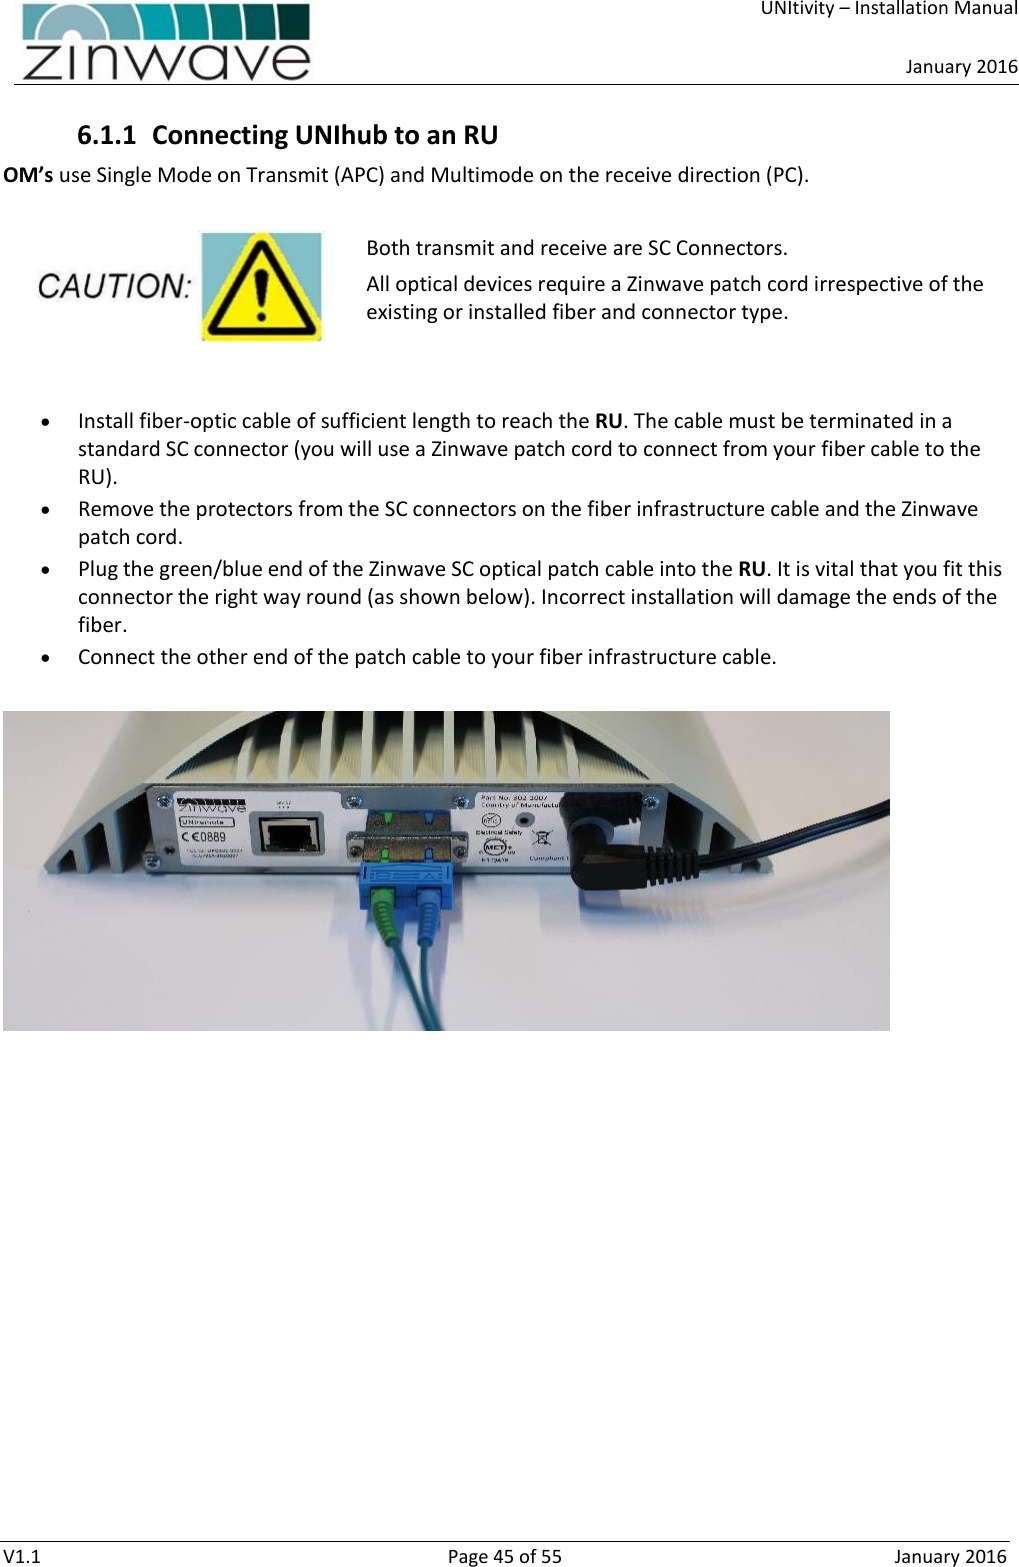     UNItivity – Installation Manual      January 2016  V1.1  Page 45 of 55  January 2016 6.1.1 Connecting UNIhub to an RU OM’s use Single Mode on Transmit (APC) and Multimode on the receive direction (PC).  Both transmit and receive are SC Connectors. All optical devices require a Zinwave patch cord irrespective of the existing or installed fiber and connector type.    Install fiber-optic cable of sufficient length to reach the RU. The cable must be terminated in a standard SC connector (you will use a Zinwave patch cord to connect from your fiber cable to the RU).  Remove the protectors from the SC connectors on the fiber infrastructure cable and the Zinwave patch cord.   Plug the green/blue end of the Zinwave SC optical patch cable into the RU. It is vital that you fit this connector the right way round (as shown below). Incorrect installation will damage the ends of the fiber.  Connect the other end of the patch cable to your fiber infrastructure cable.      